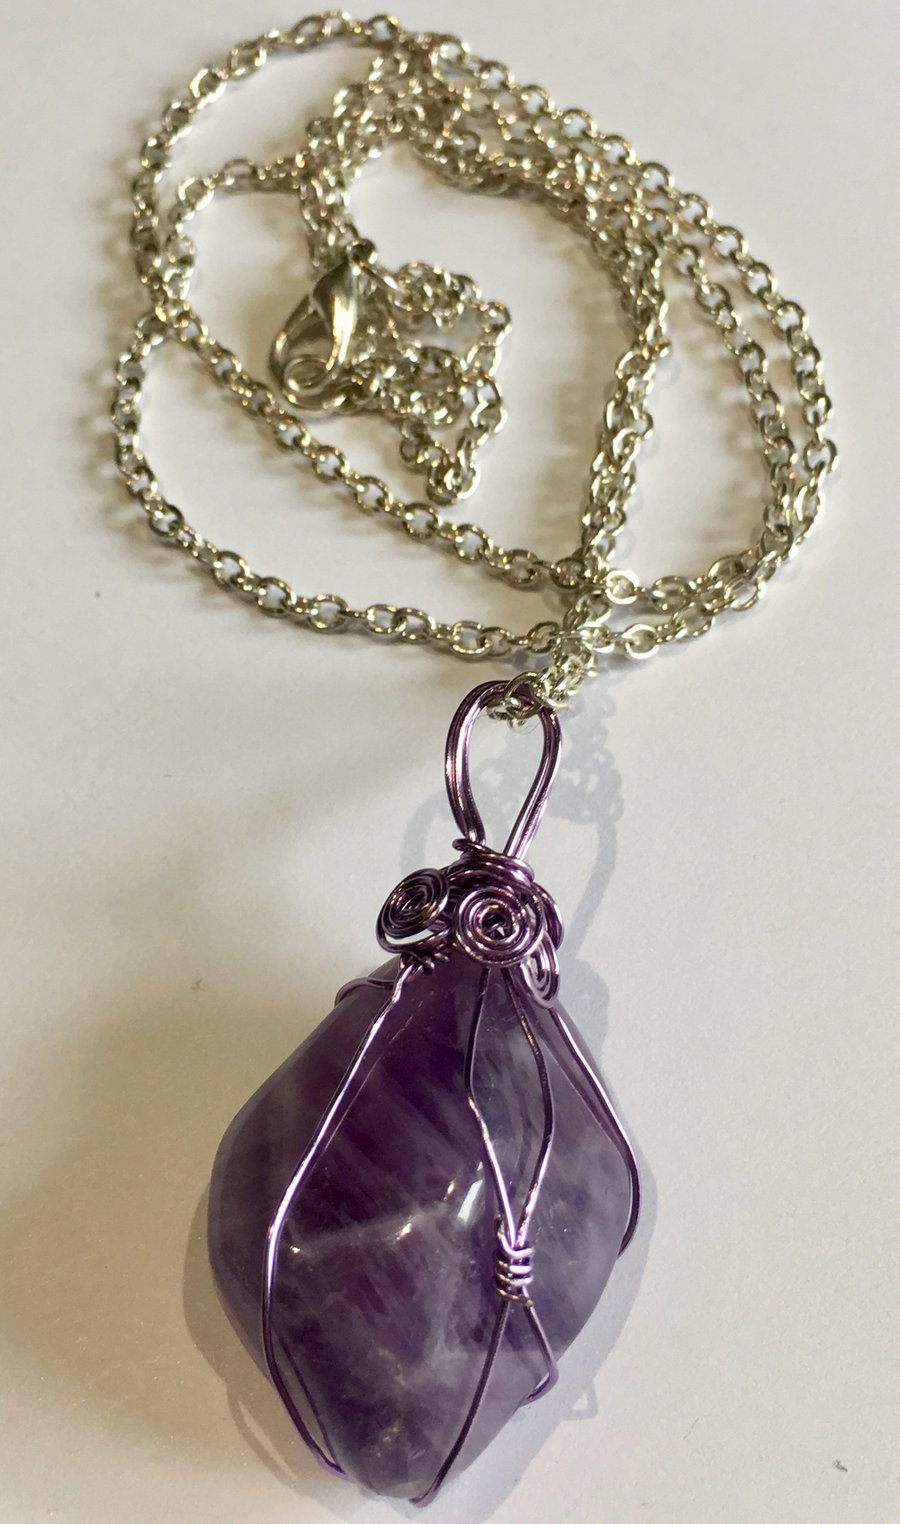 Amethyst Pendant encased in wire cage